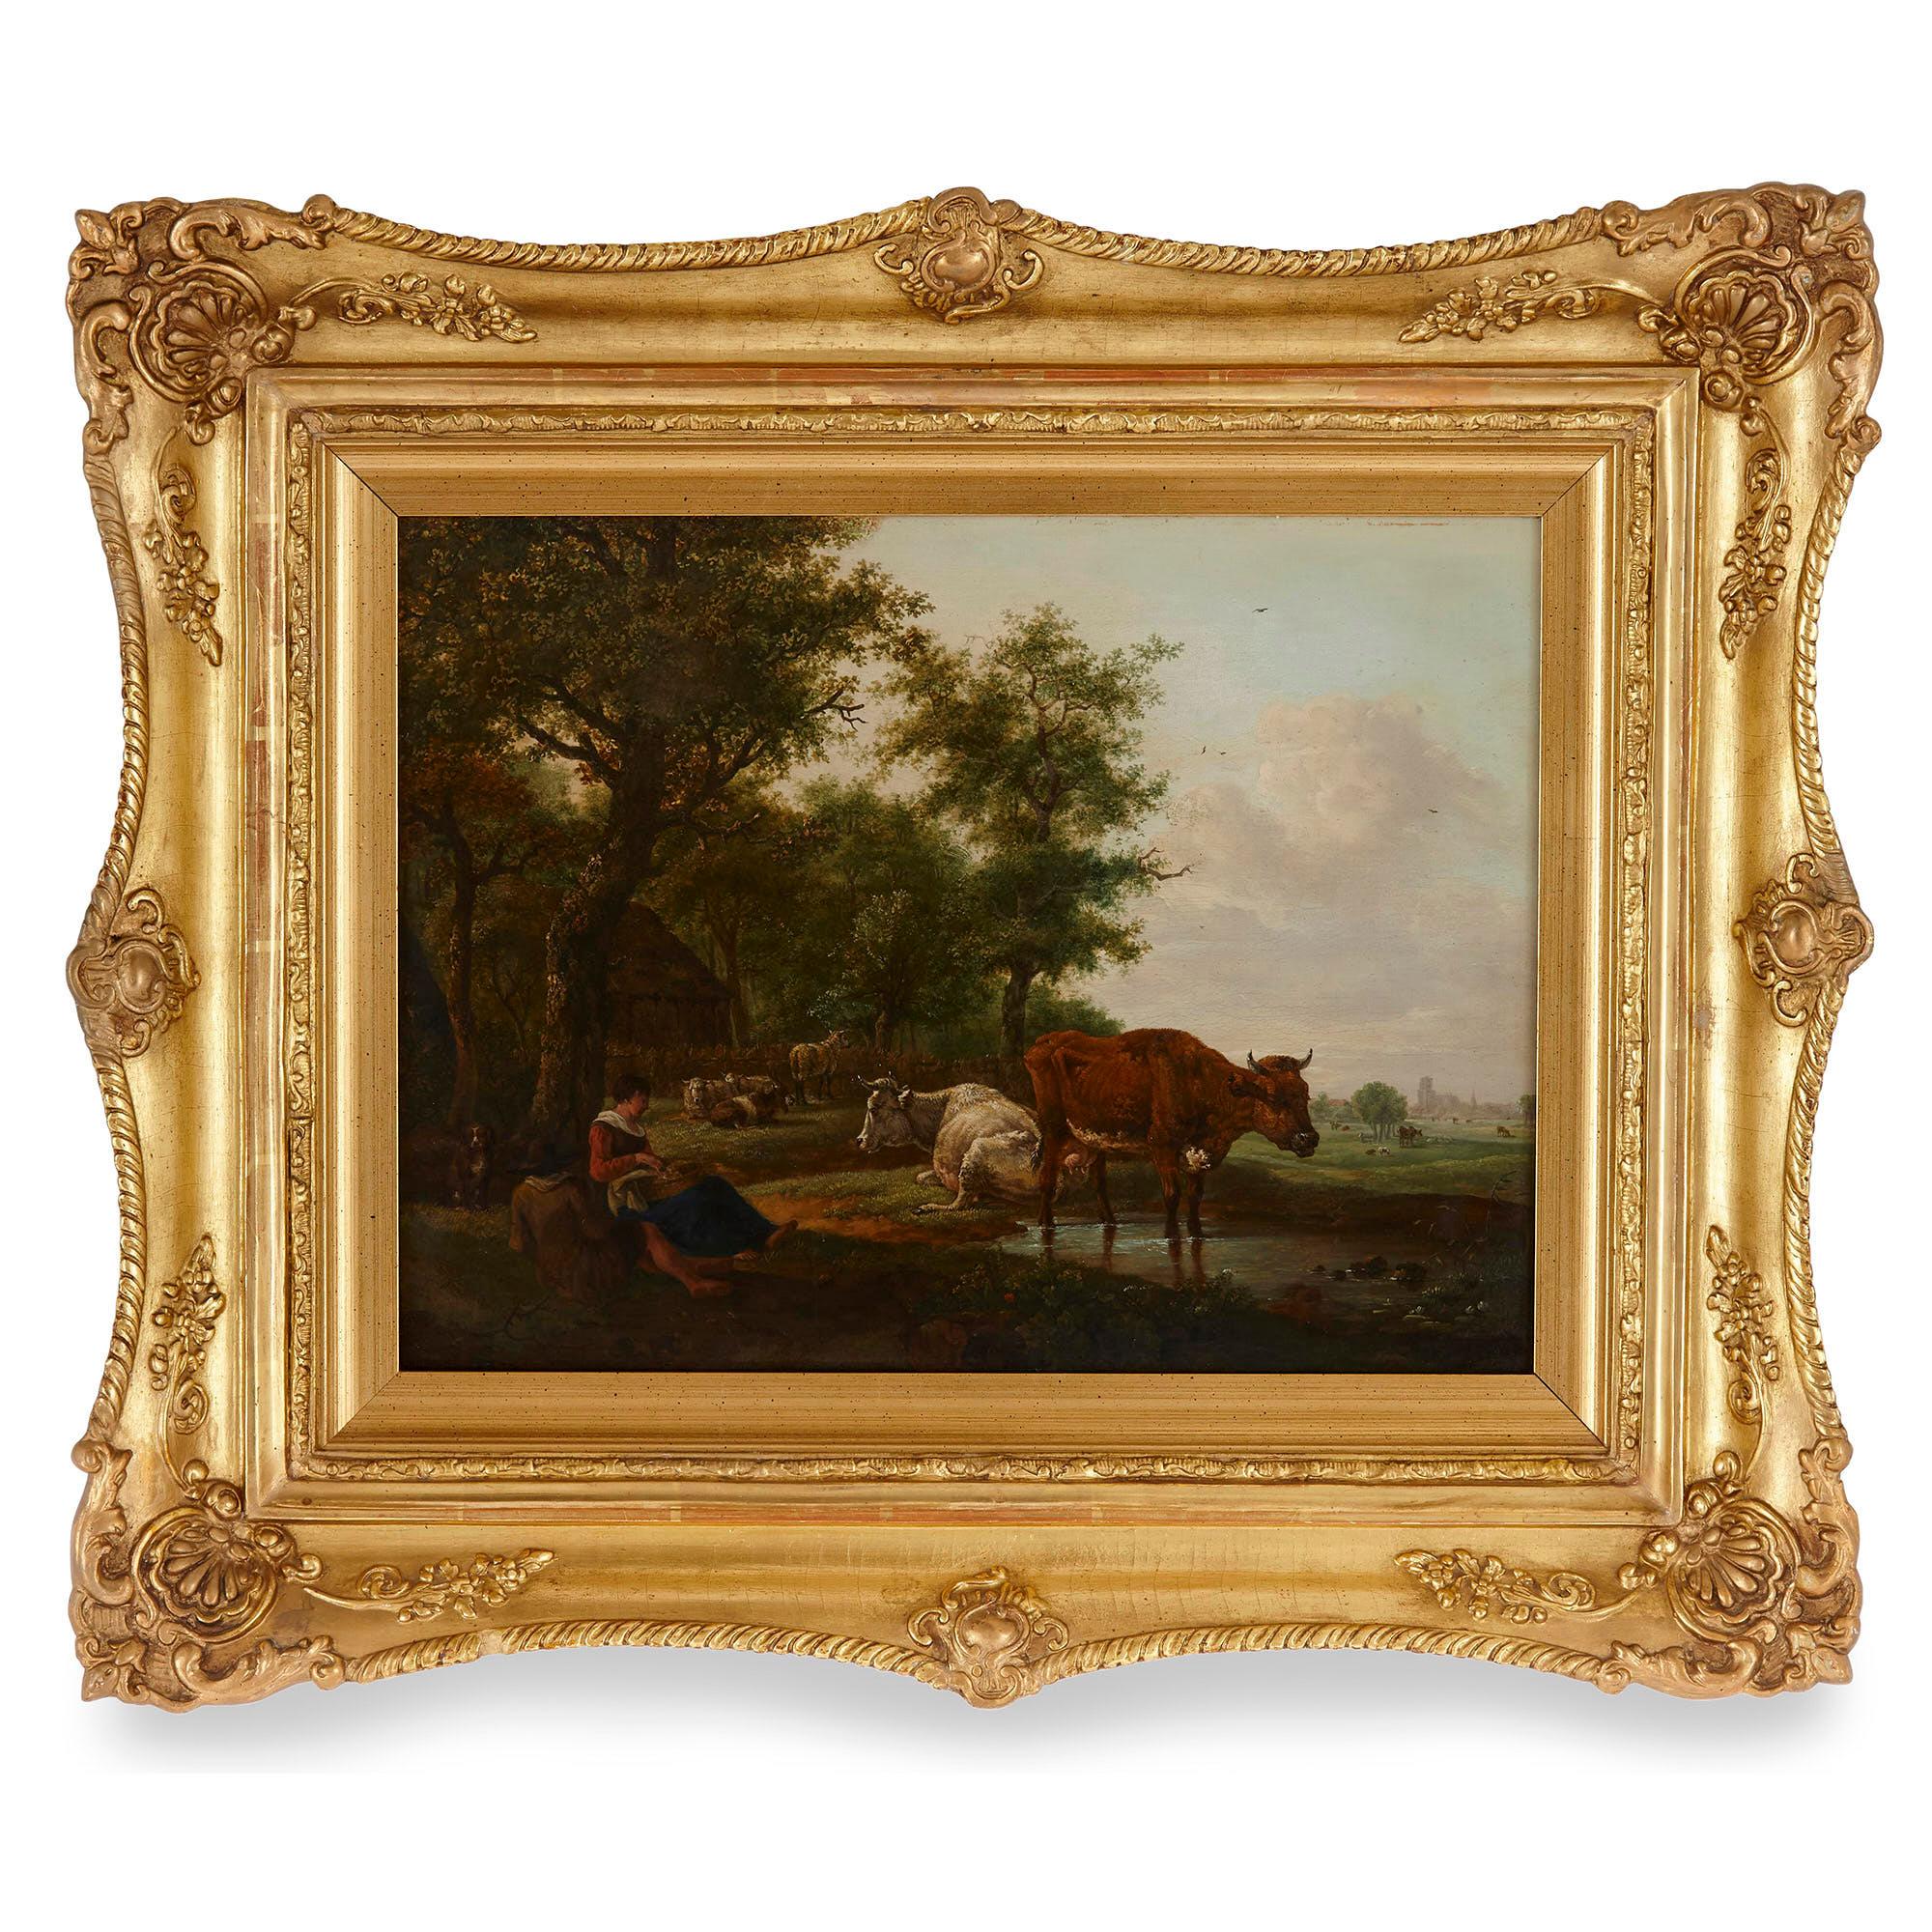 Unknown Landscape Painting - Antique Dutch painting of countryside with figures and animals